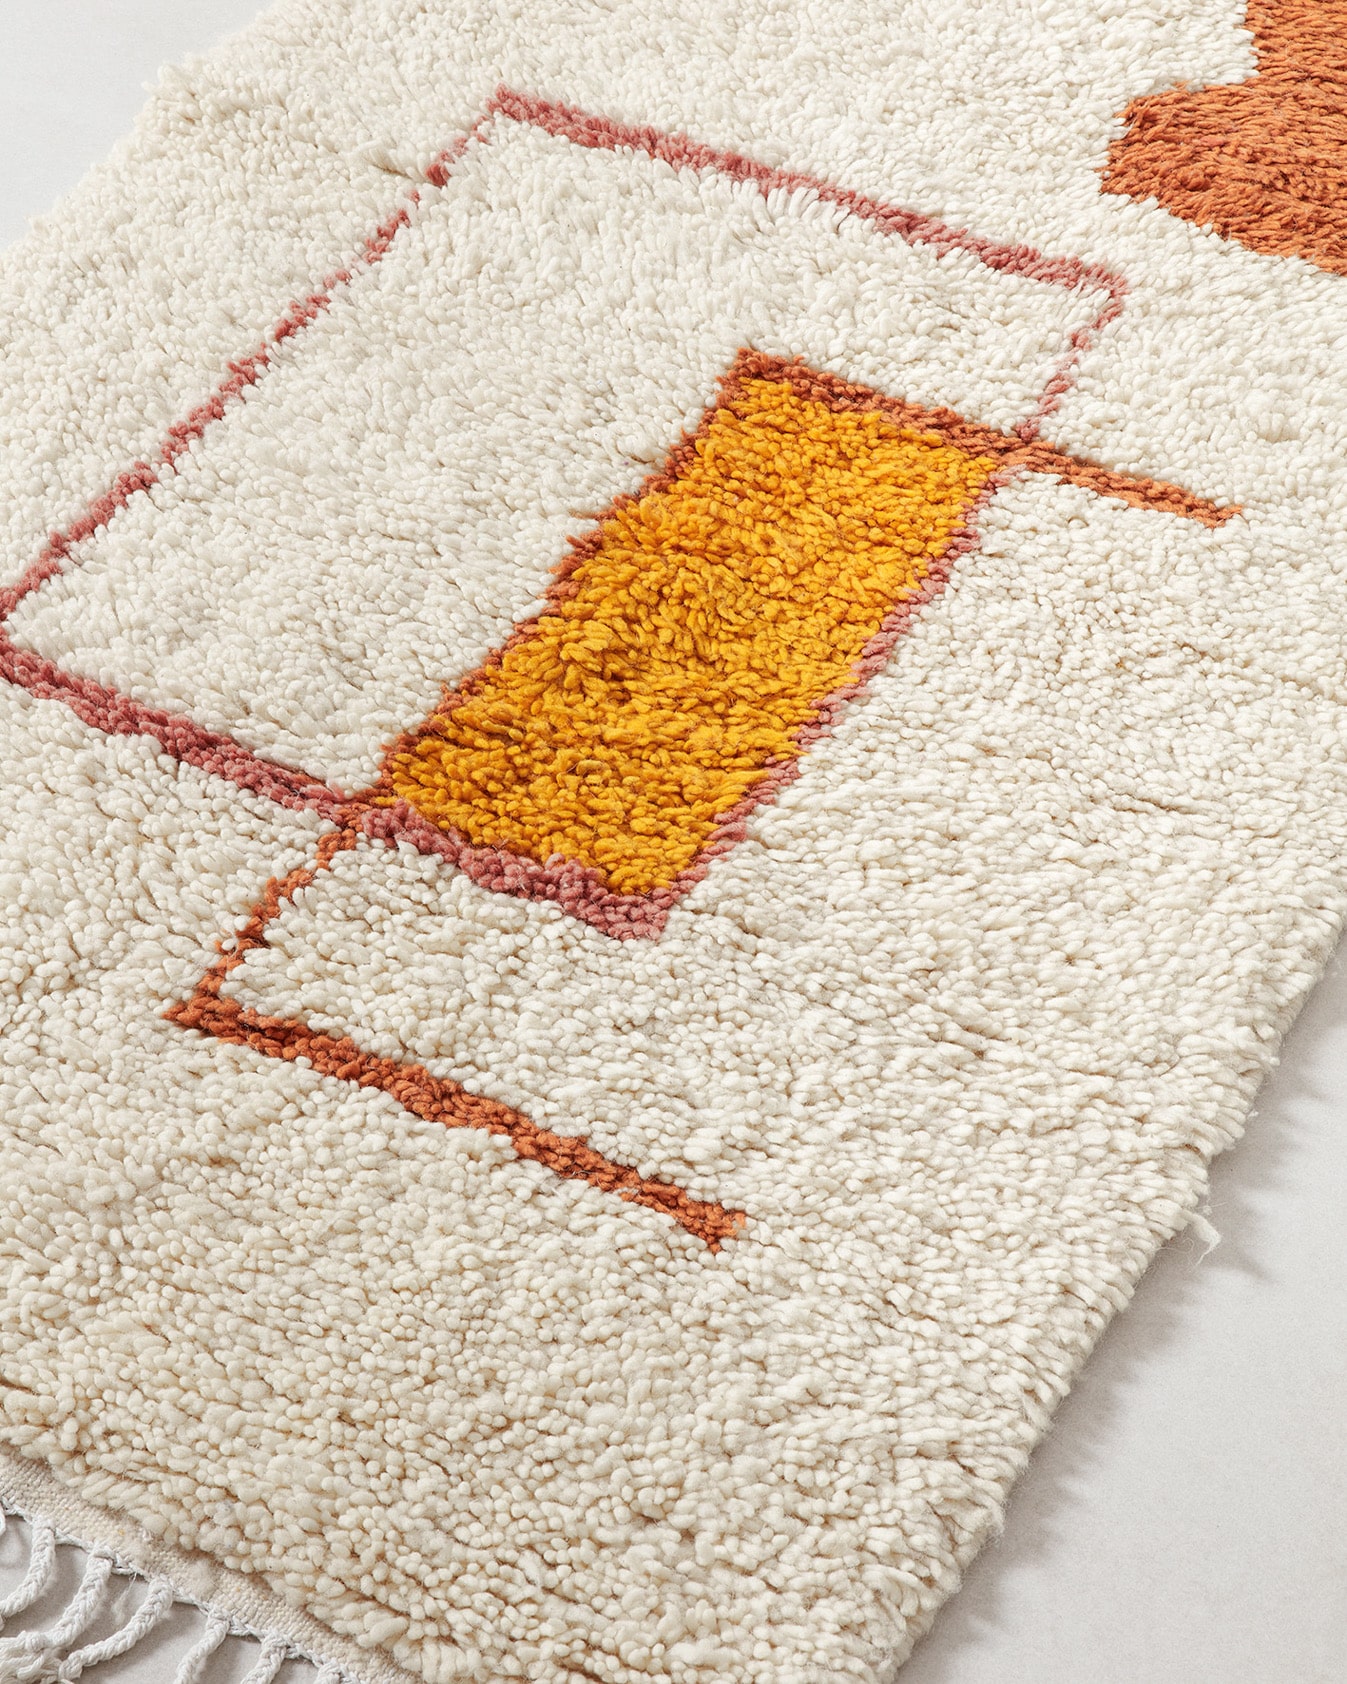 Berber rug with cinnamon and ochre shapes, close